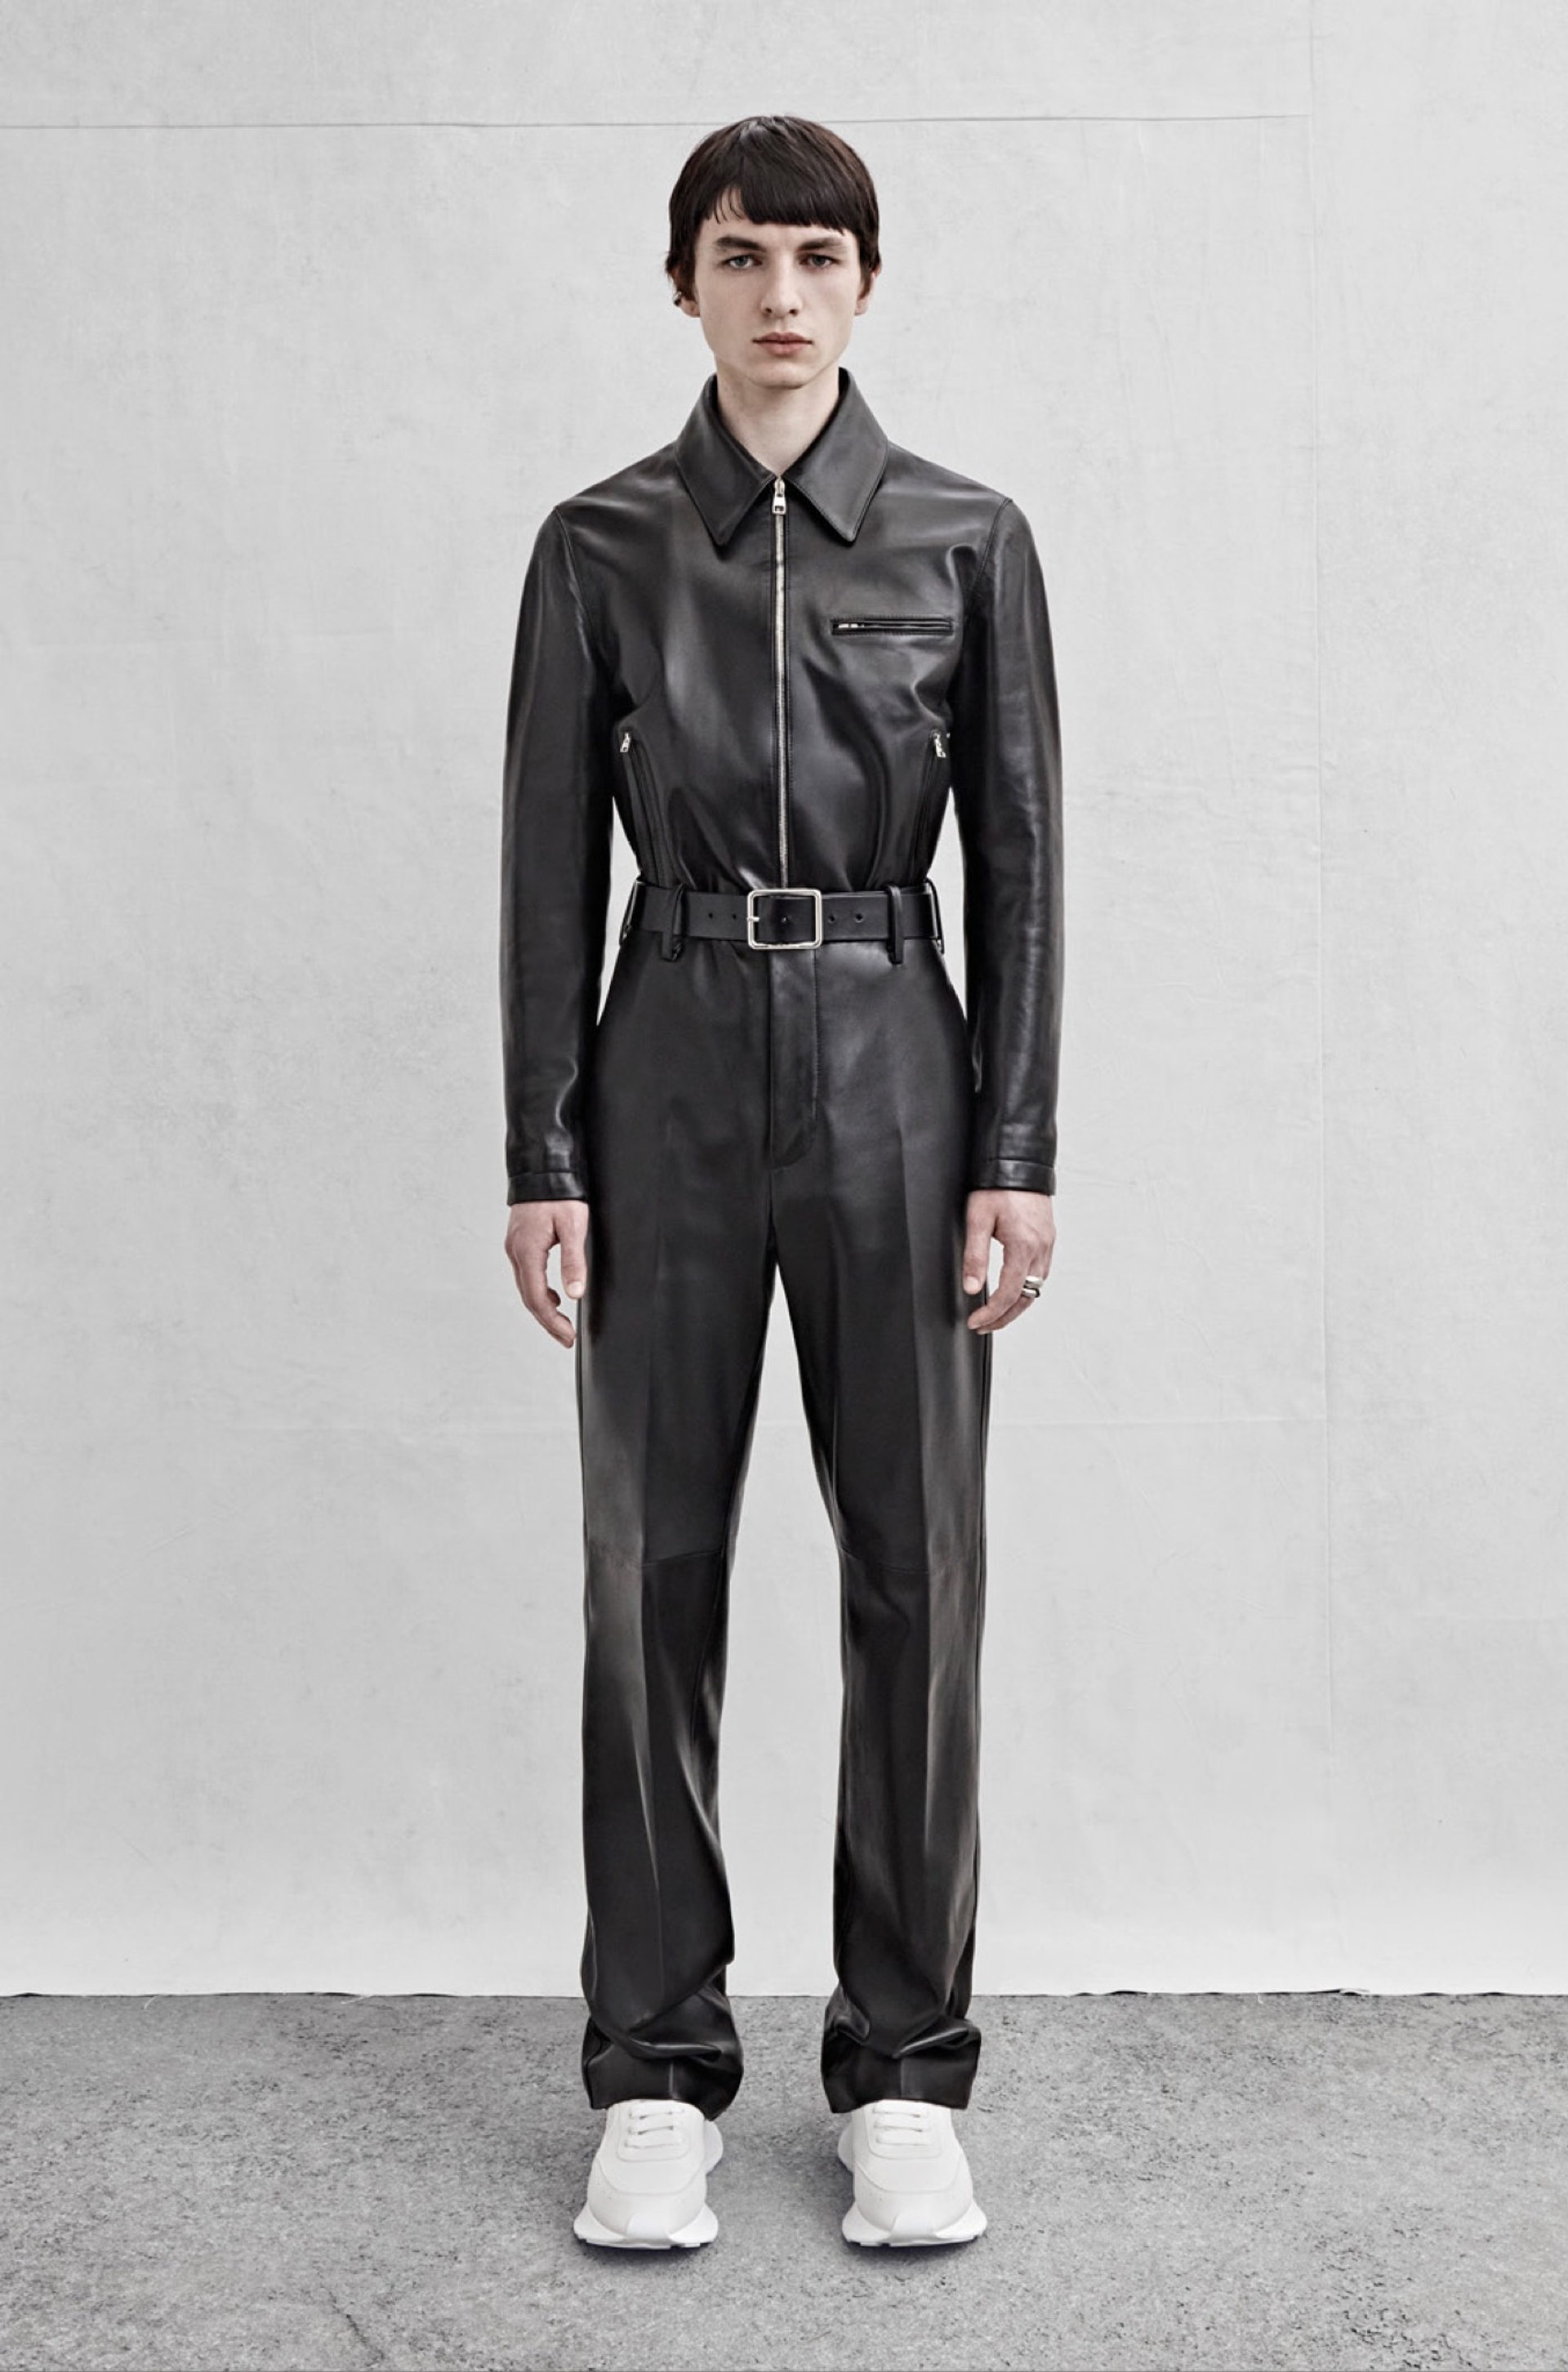 A bomber jacket in black leather and wide-legged trousers in black leather.